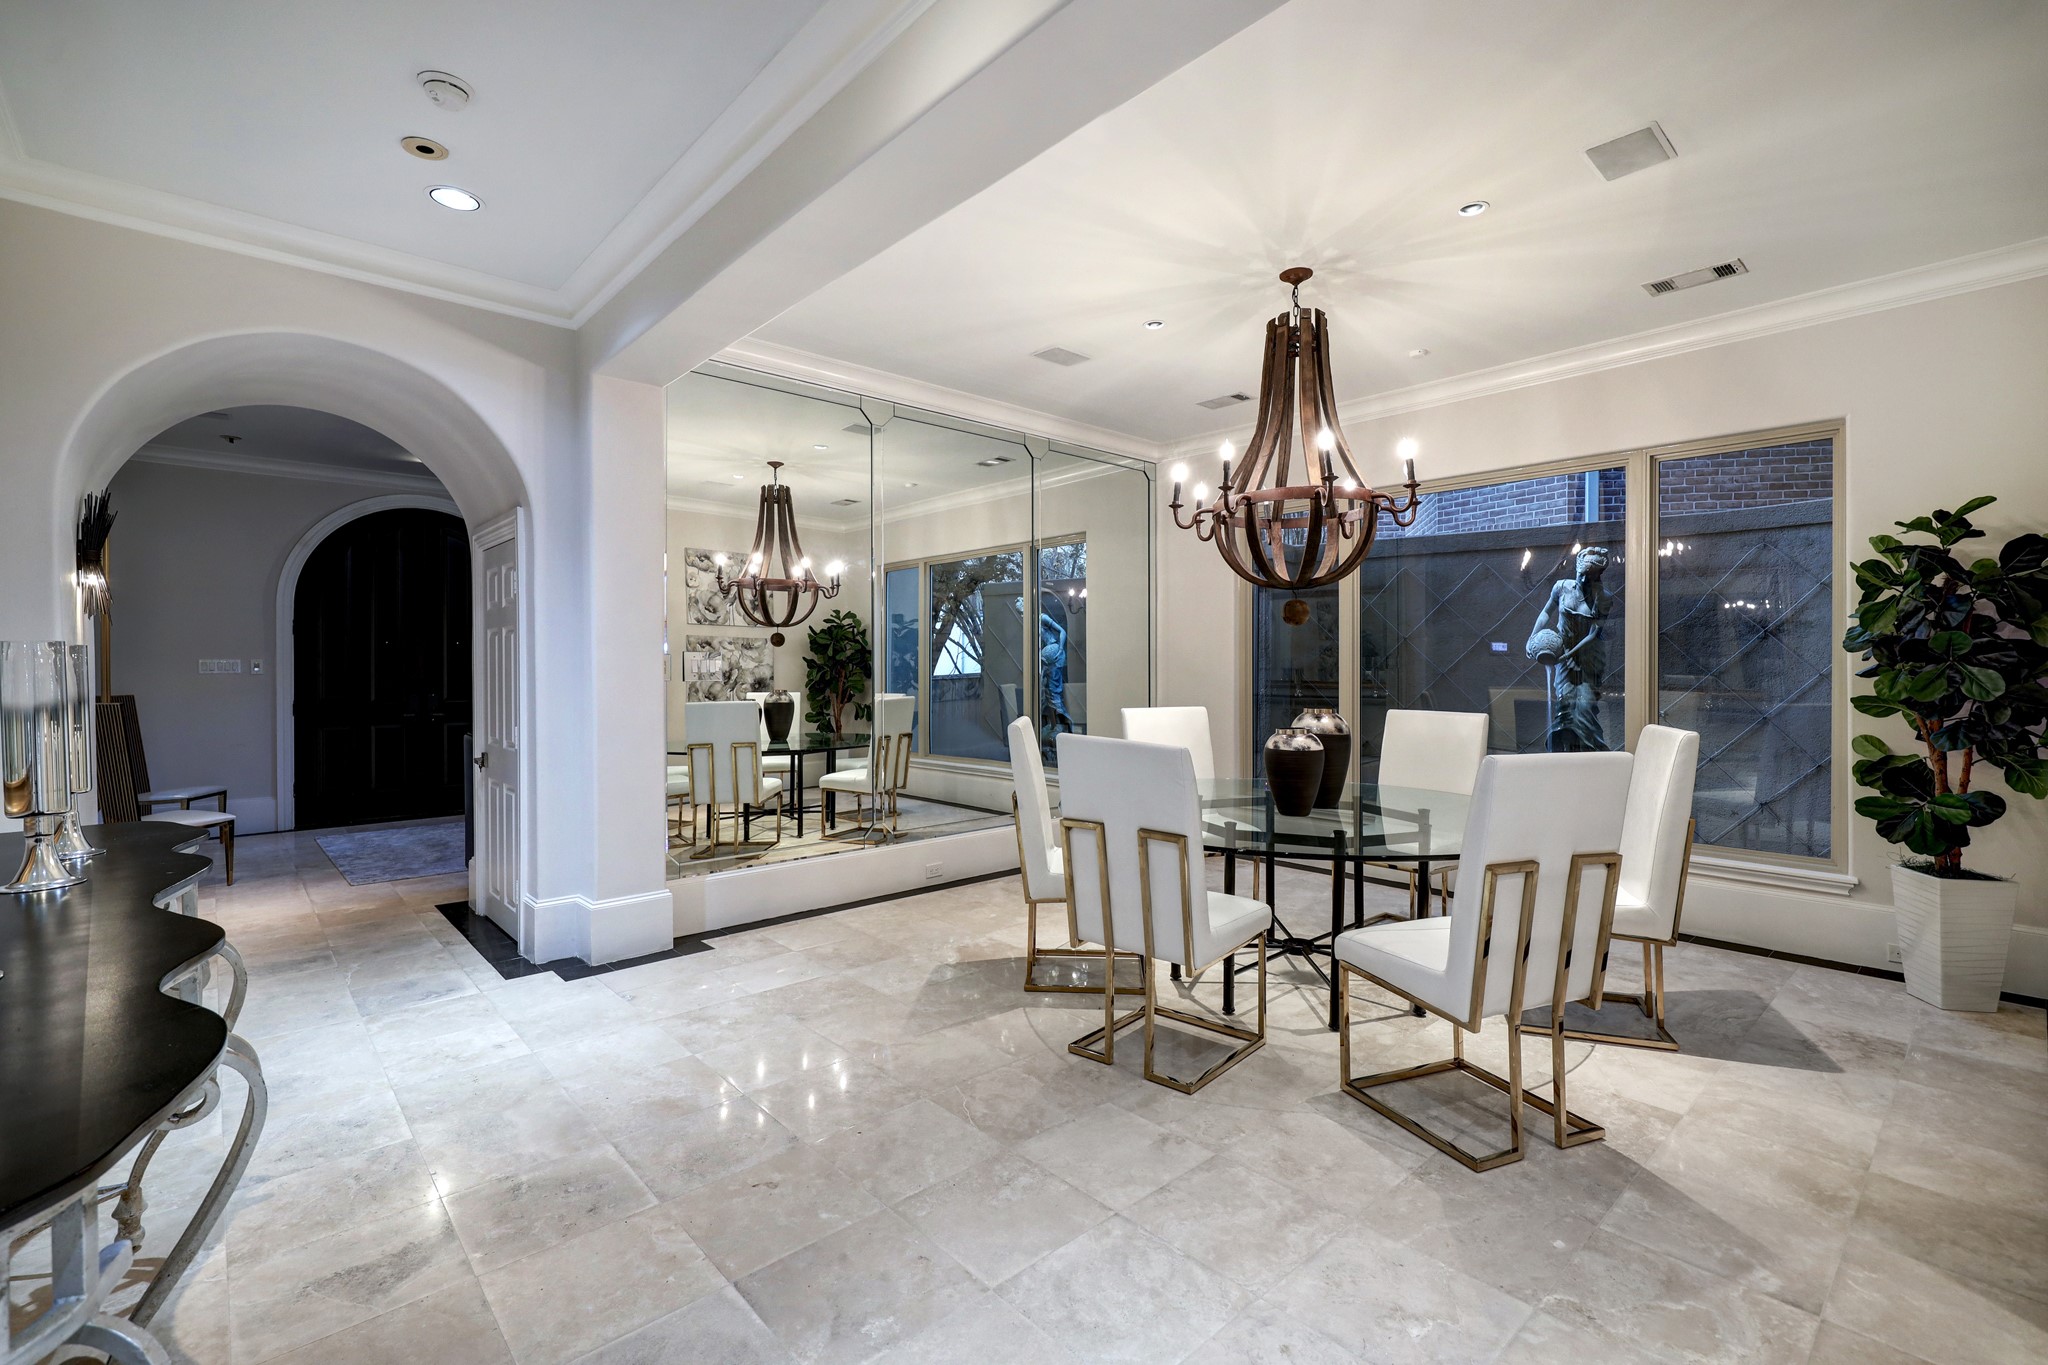 The Formal Dining Room is centrally located and features tile floors, crown molding & baseboards, a mirrored wall, windows overlooking the side courtyard with a fountain and access to the Wet Bar.